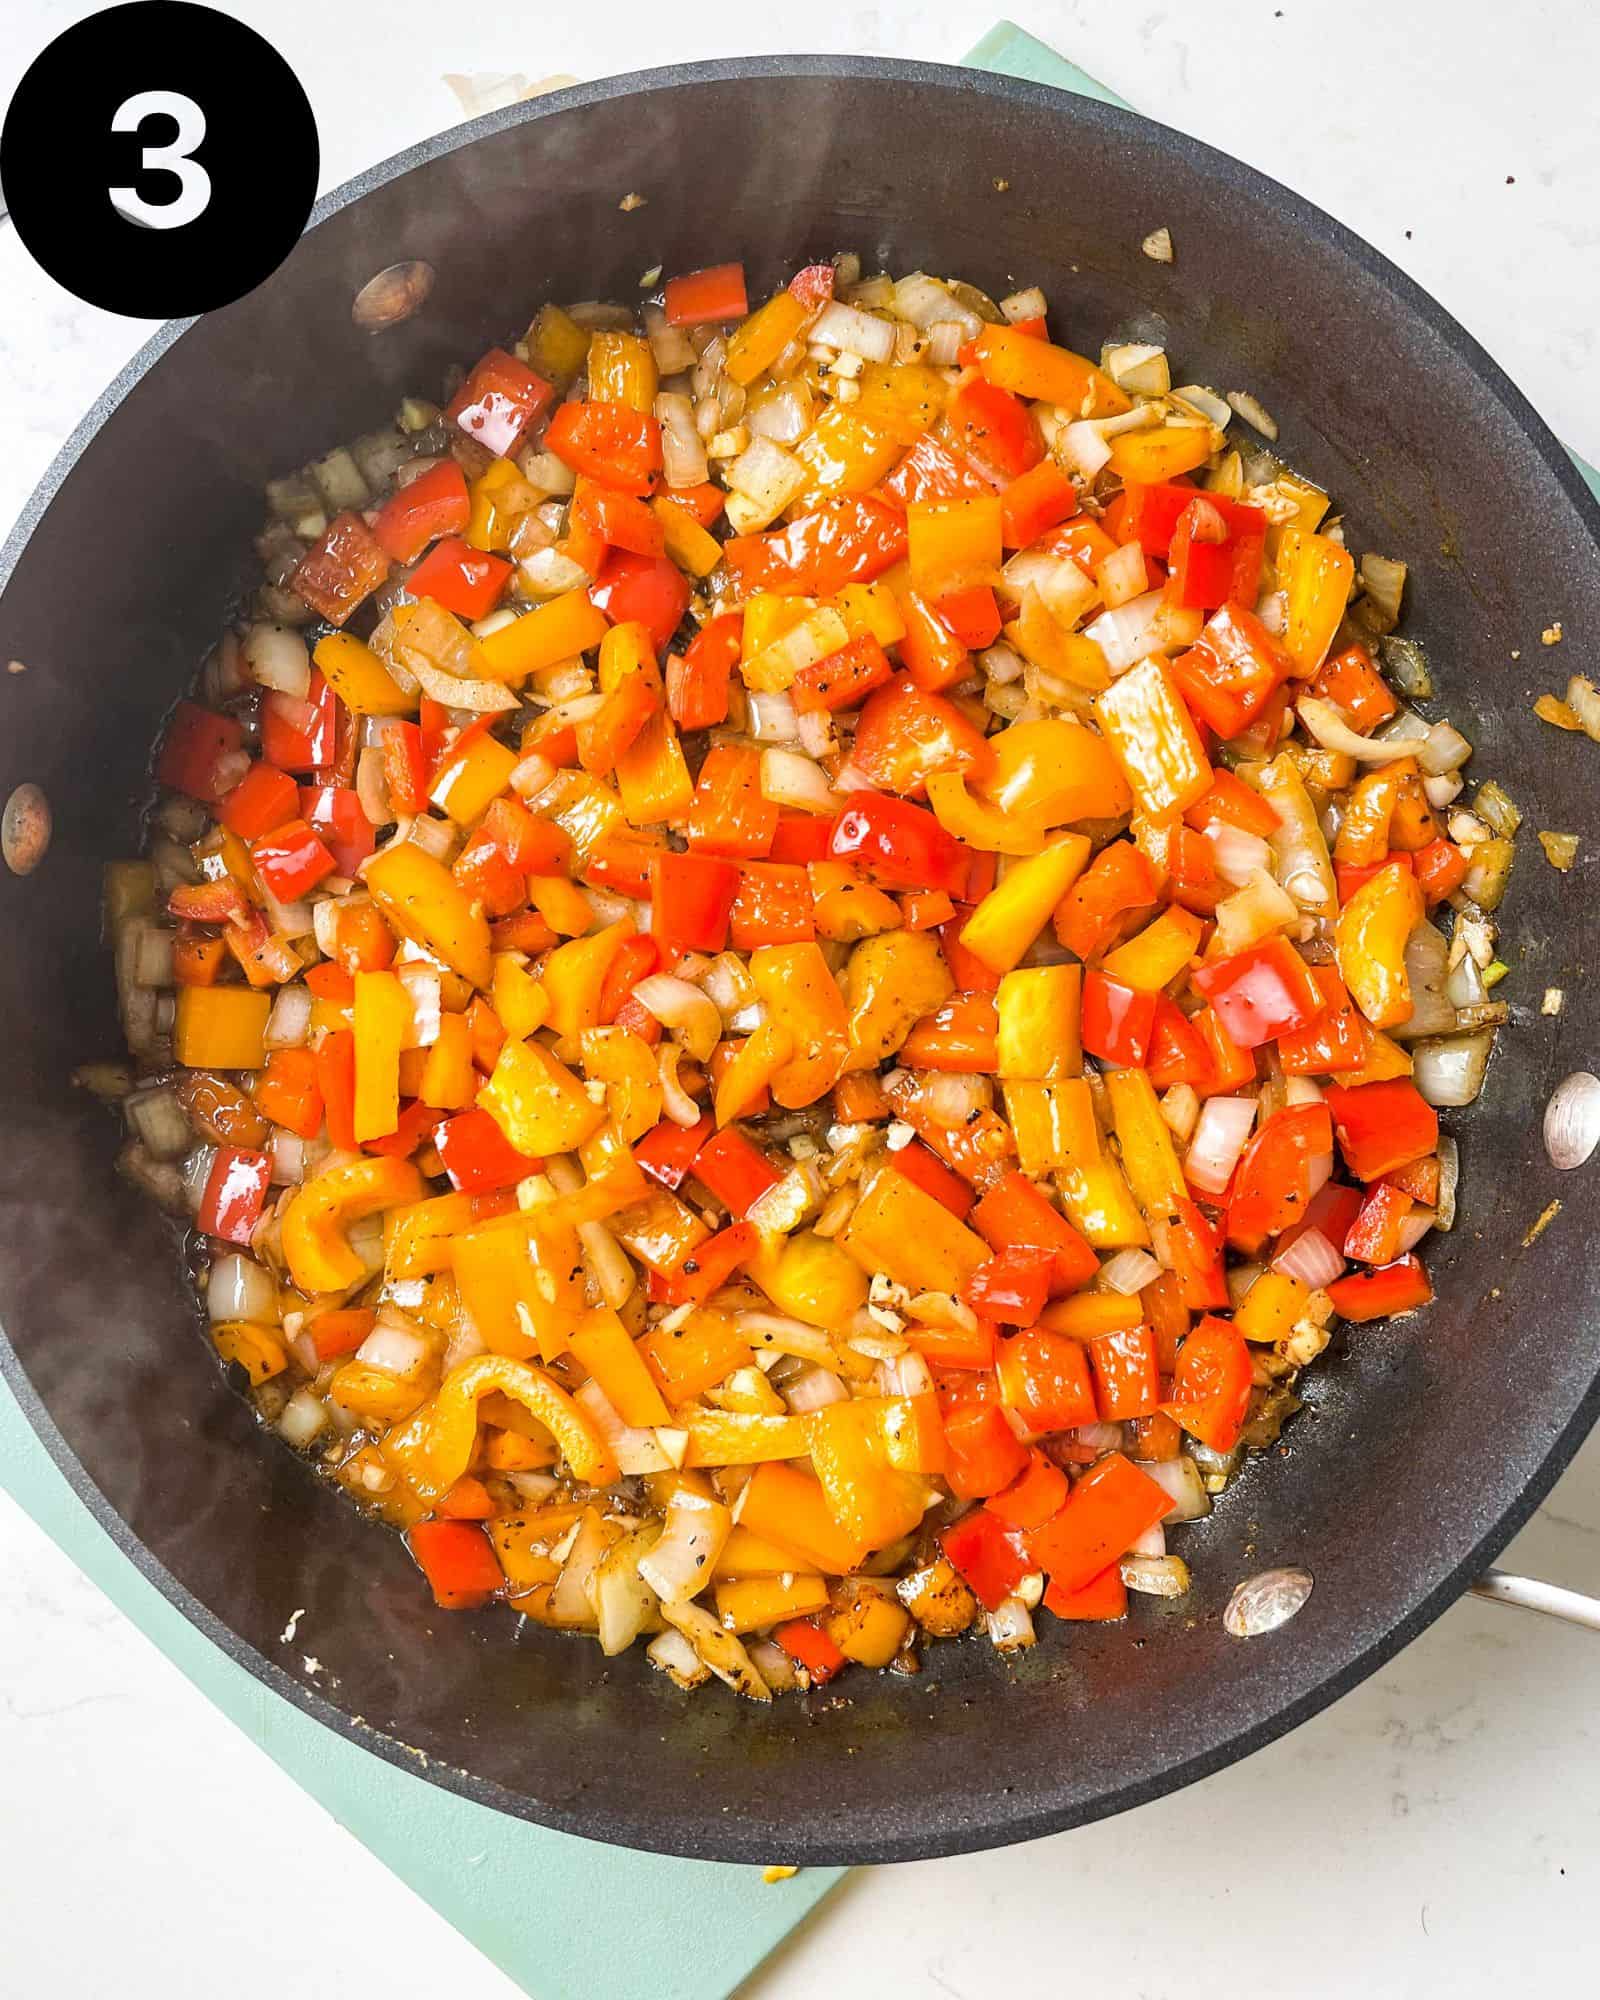 diced onions, bell peppers, and garlic in a skillet.